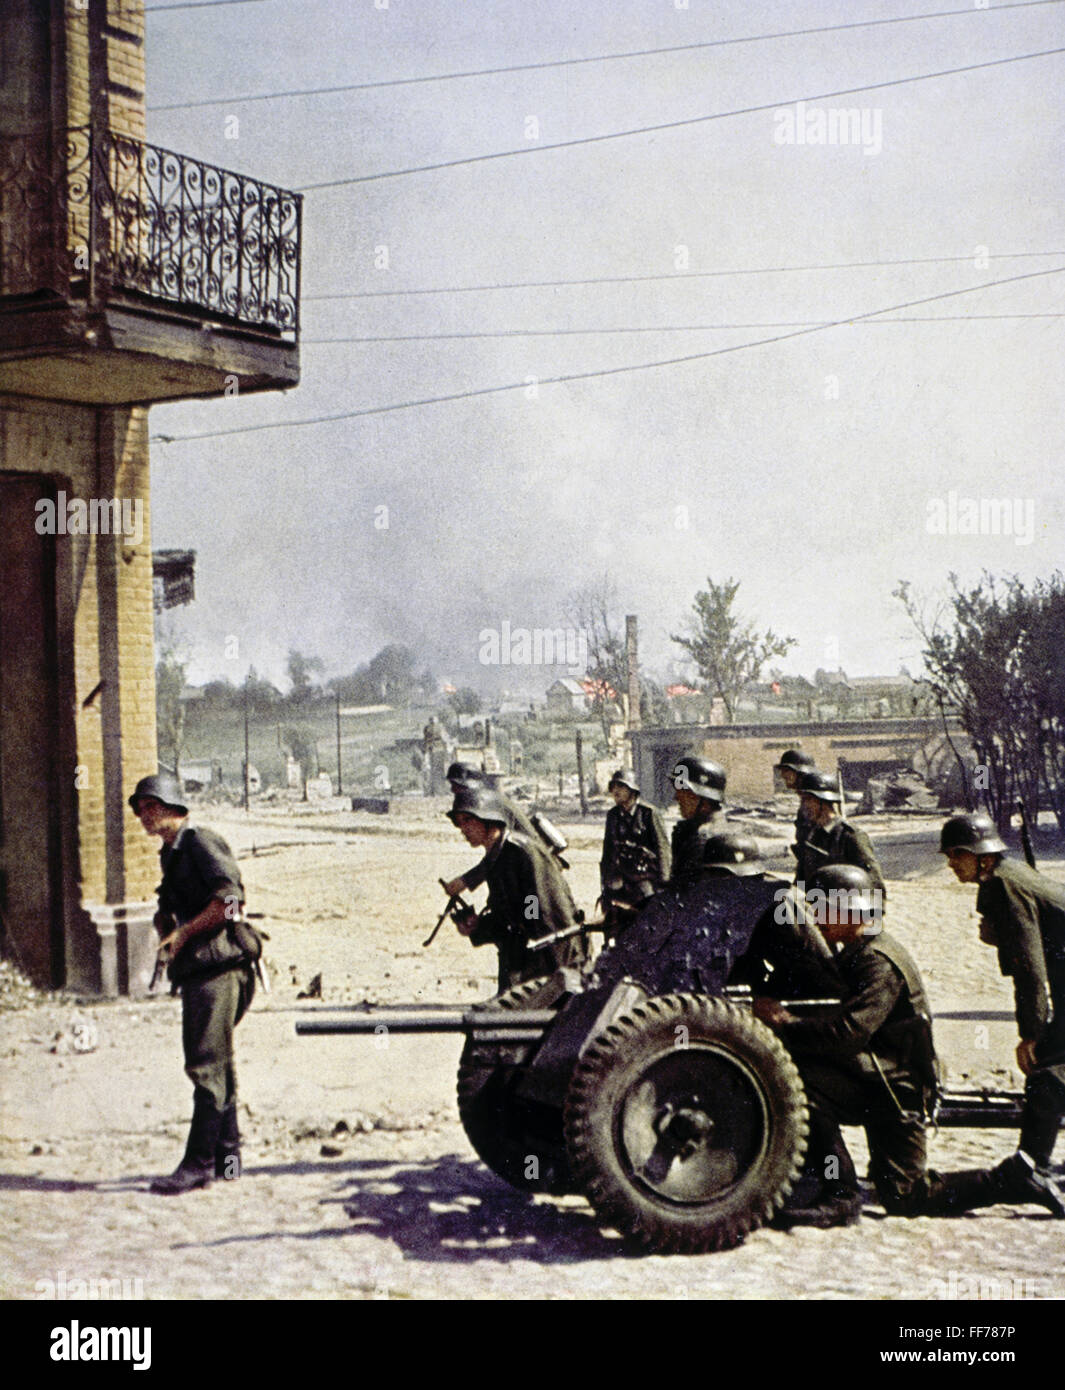 events, Second World War / WWII, German Wehrmacht, infantry with 3.7 cm anti-tank gun Pak 36, circa 1940, gunners, crew, Germany, Third Reich, 20th century, historic, historical military, guns, burning, village, town, street, soldiers, people, 1940s, Additional-Rights-Clearences-Not Available Stock Photo